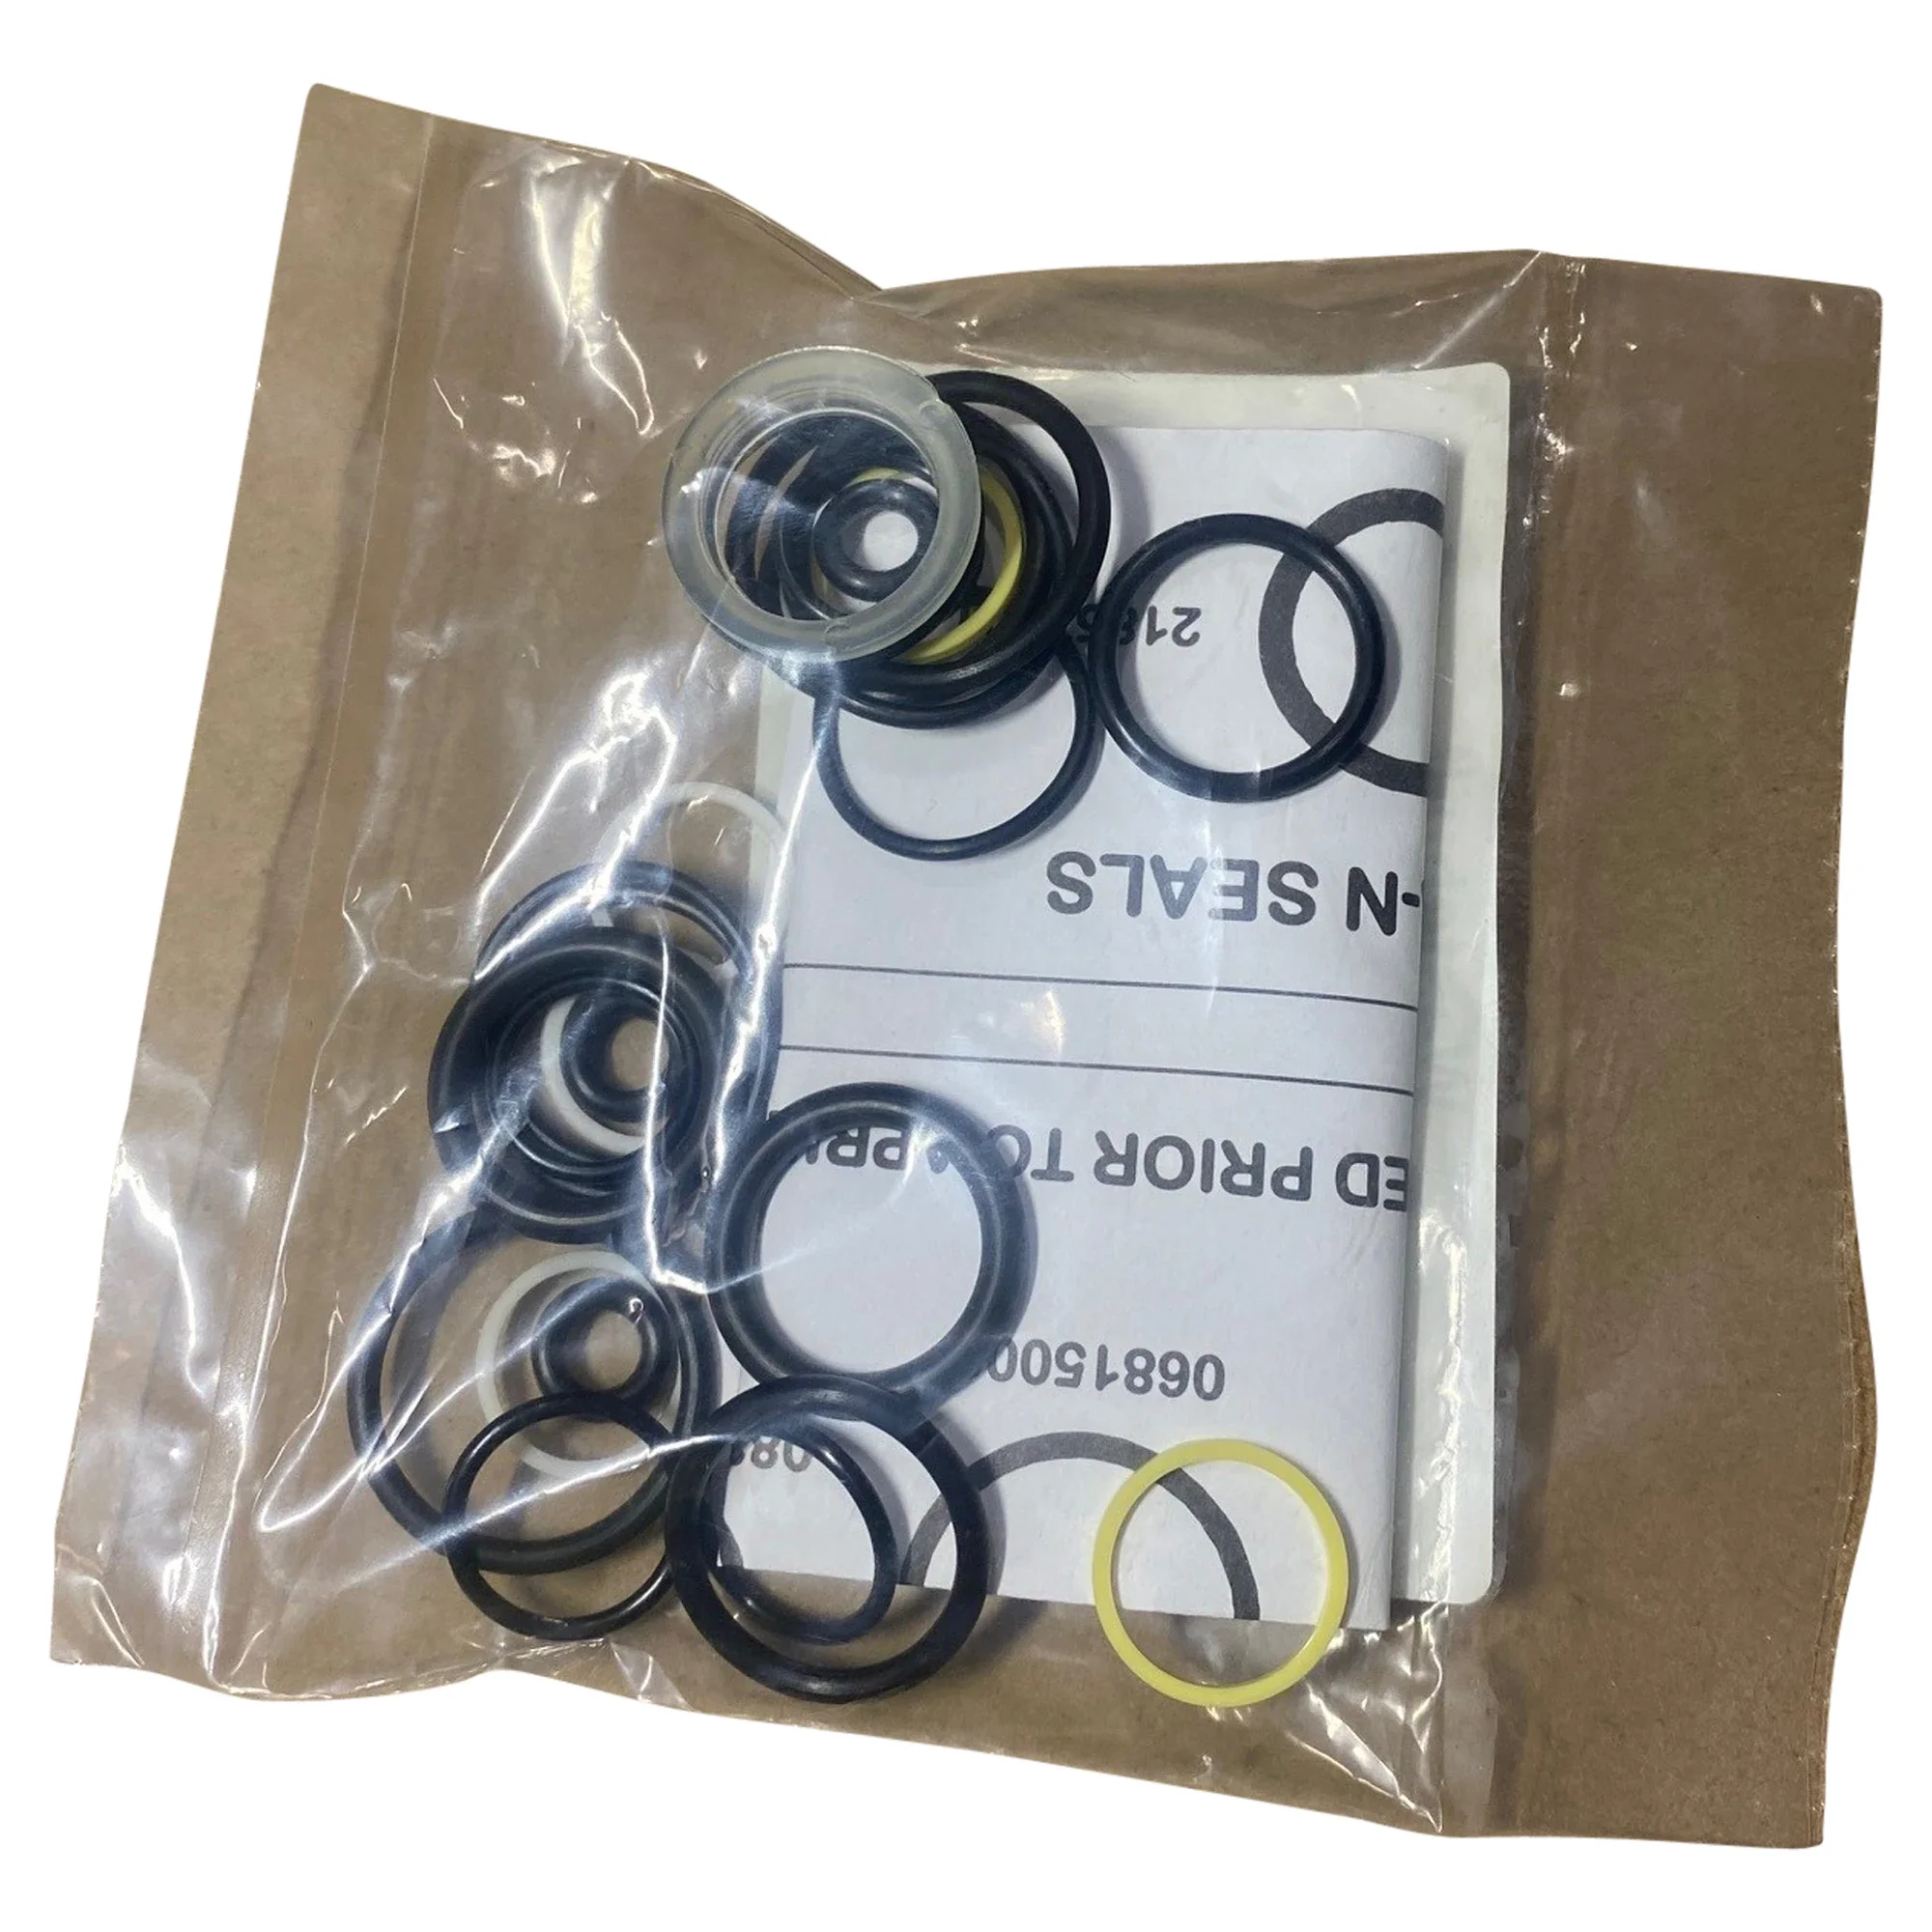 Wastebuilt® Replacement for New Way Seal Kit, Valve Section (Section/Spool)